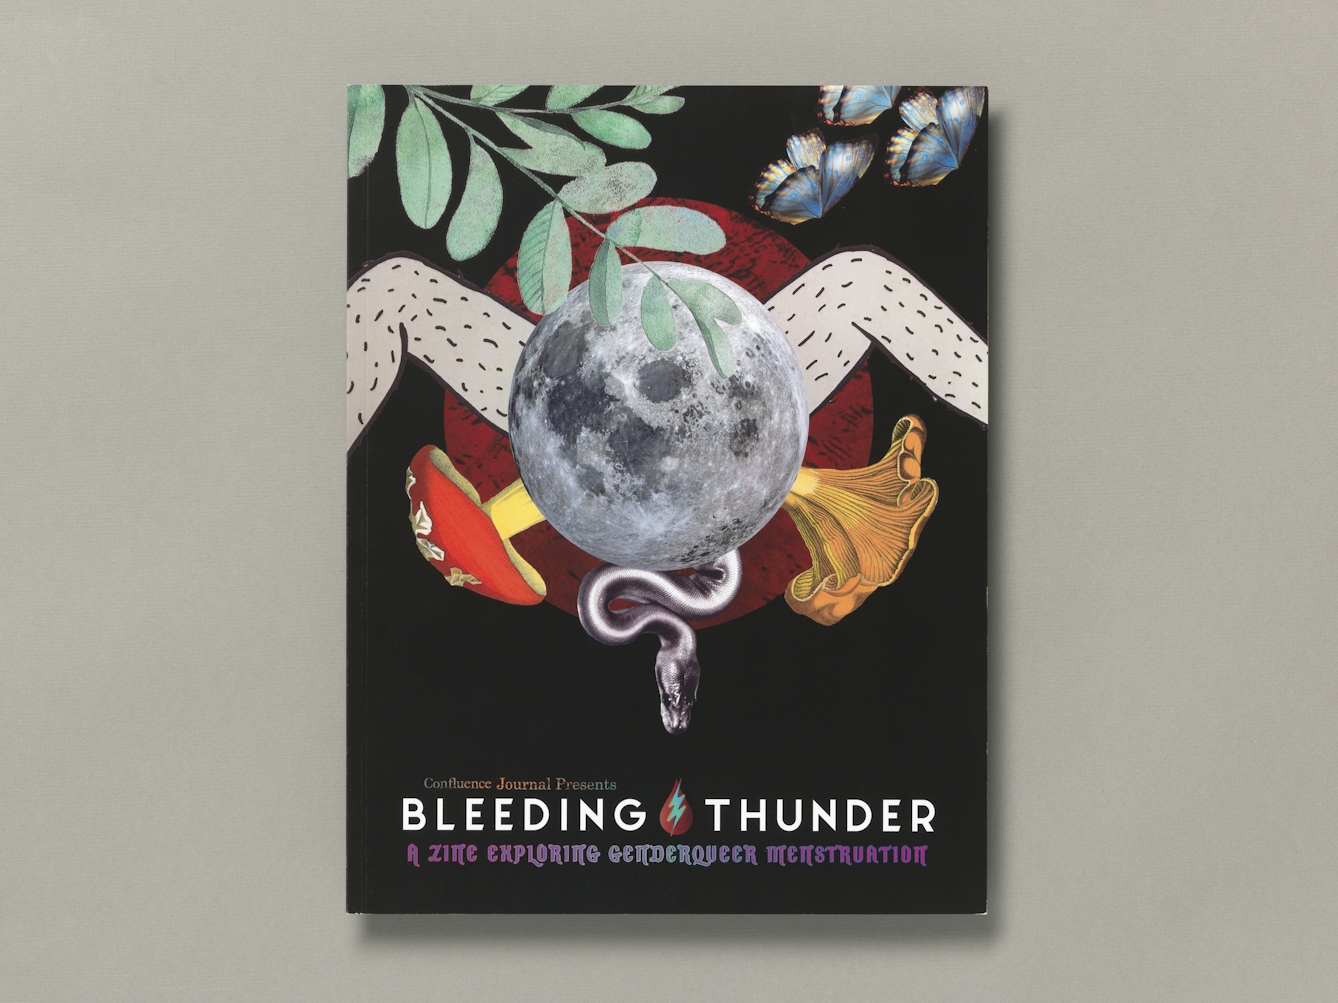 Cover of the zine Bleeding Thunder shows a collage illustration of a pair of pale, hairy legs, open with knees bent. Between the legs is a photographic image of the moon with a serpend emerging from the bottom of the moon and a red-capped mushroom emerging from the left sitde and a yellow-frilled mushroom emerging from the right side. Above the legs on the left and right are a leafy frond and butterflies respectively. The background is a red coloured disc on a matt black surface.